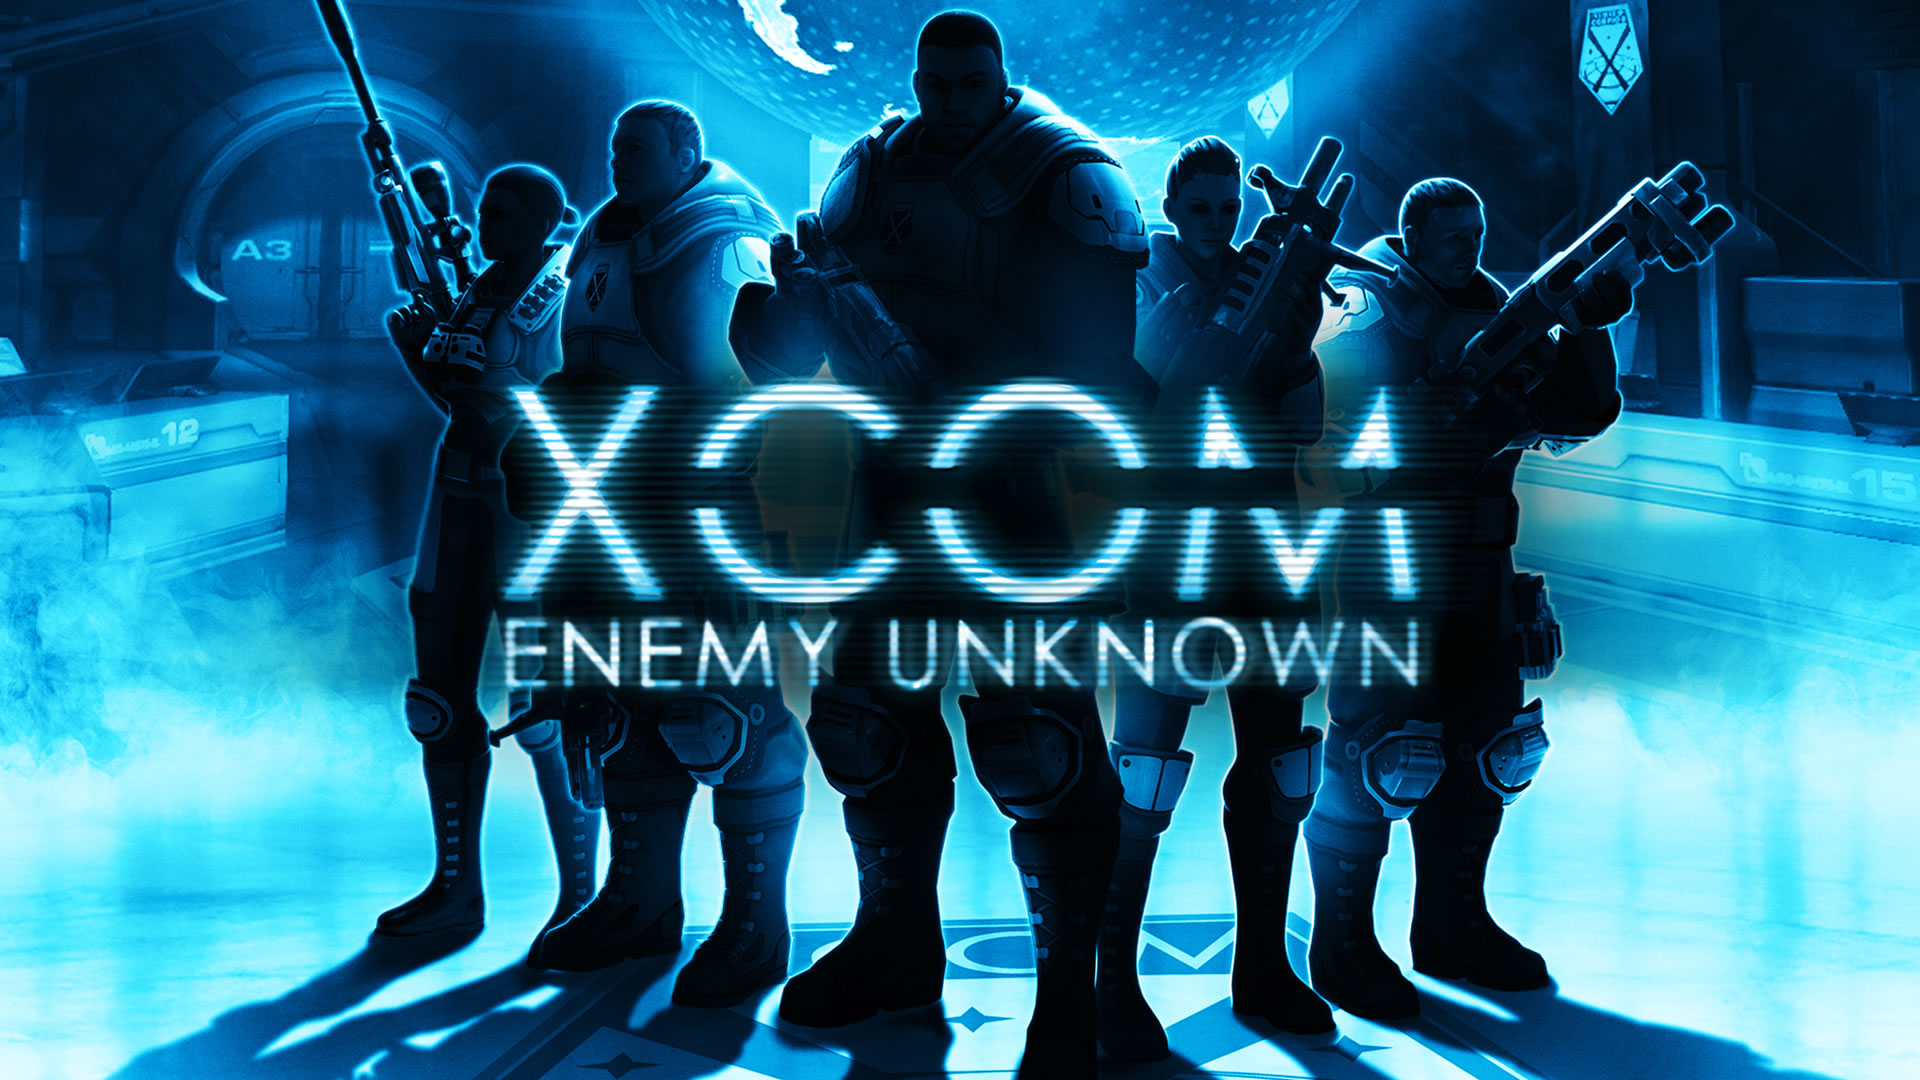 XCOM Enemy Unknown Free Download Full PC Game